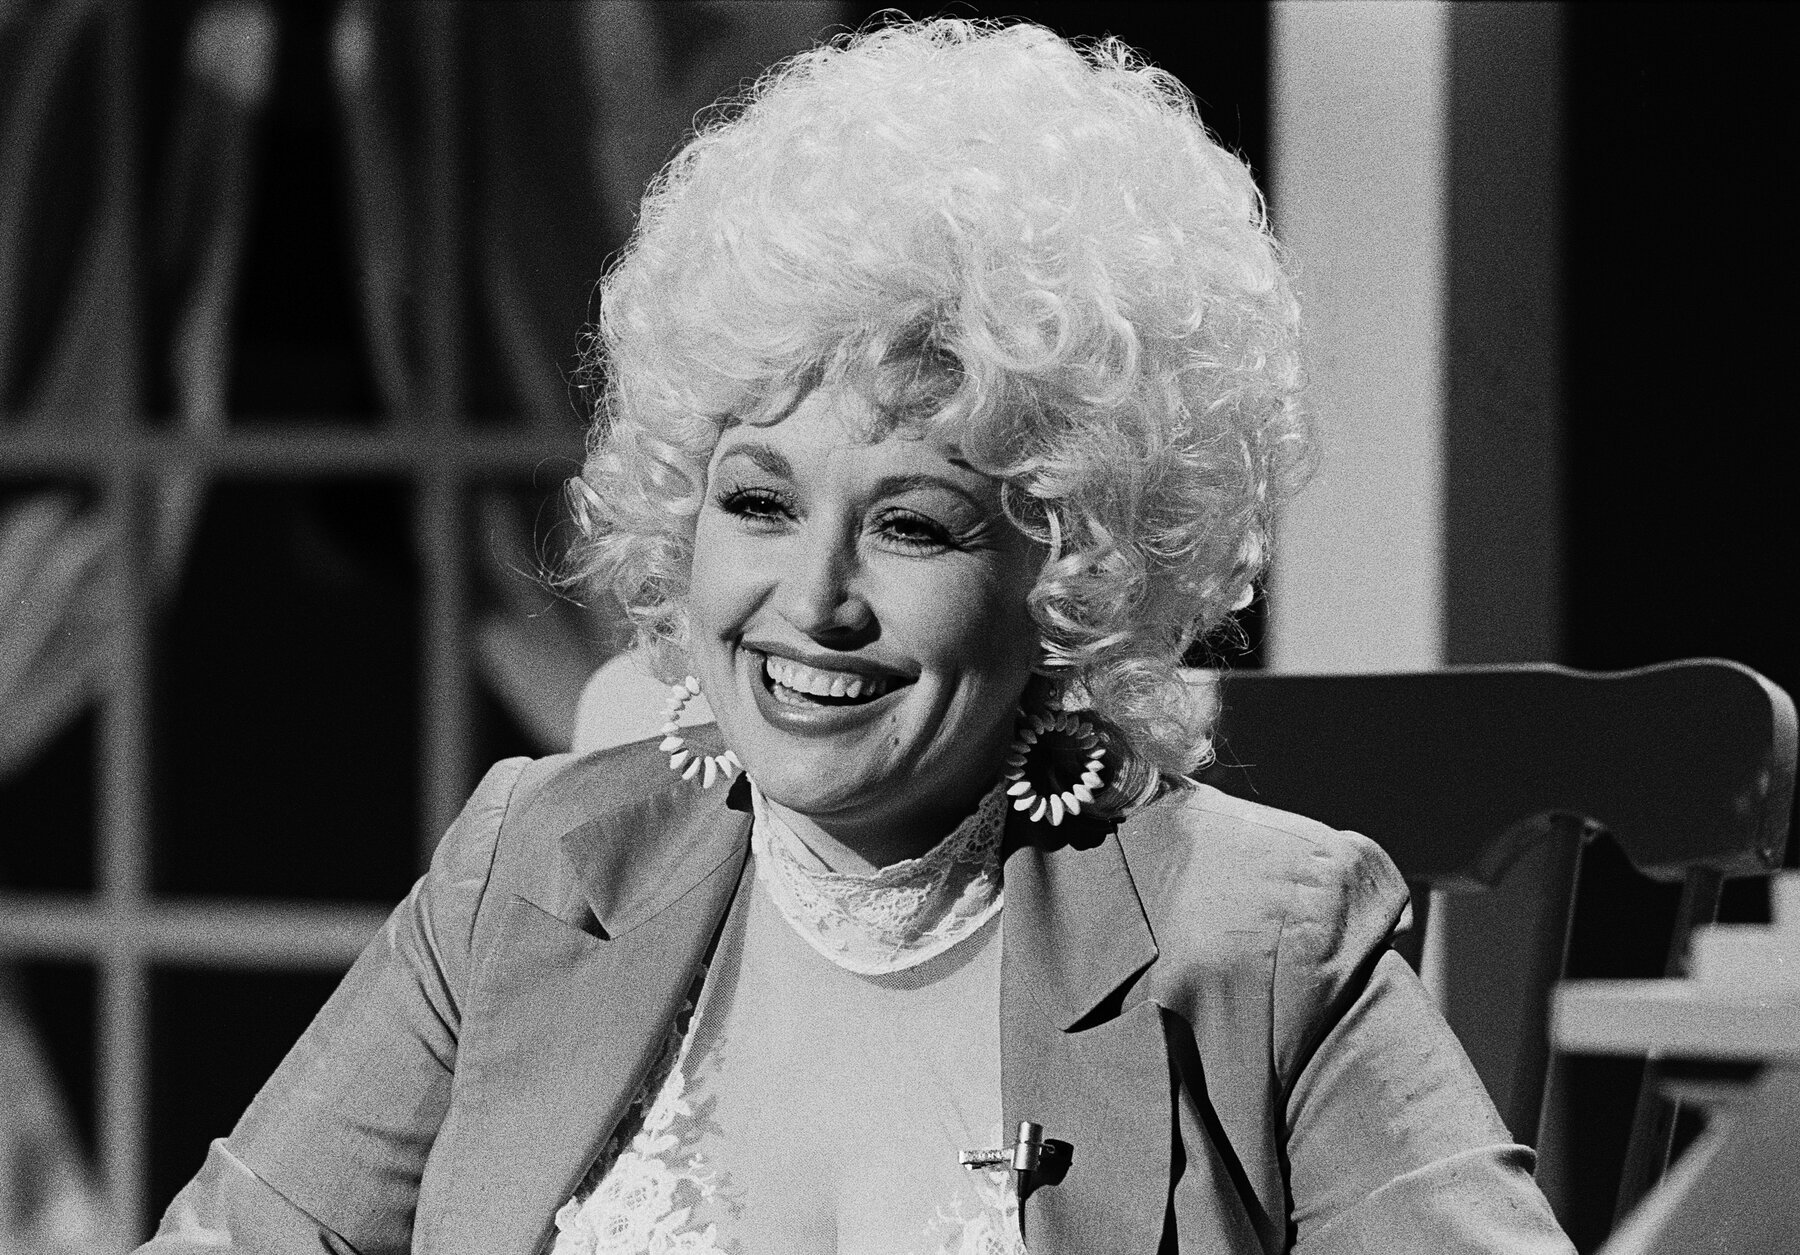 Dolly Parton sits on stage during the premiere of 'The Best Little Whorehouse in Texas' in Nashville, Tennessee.